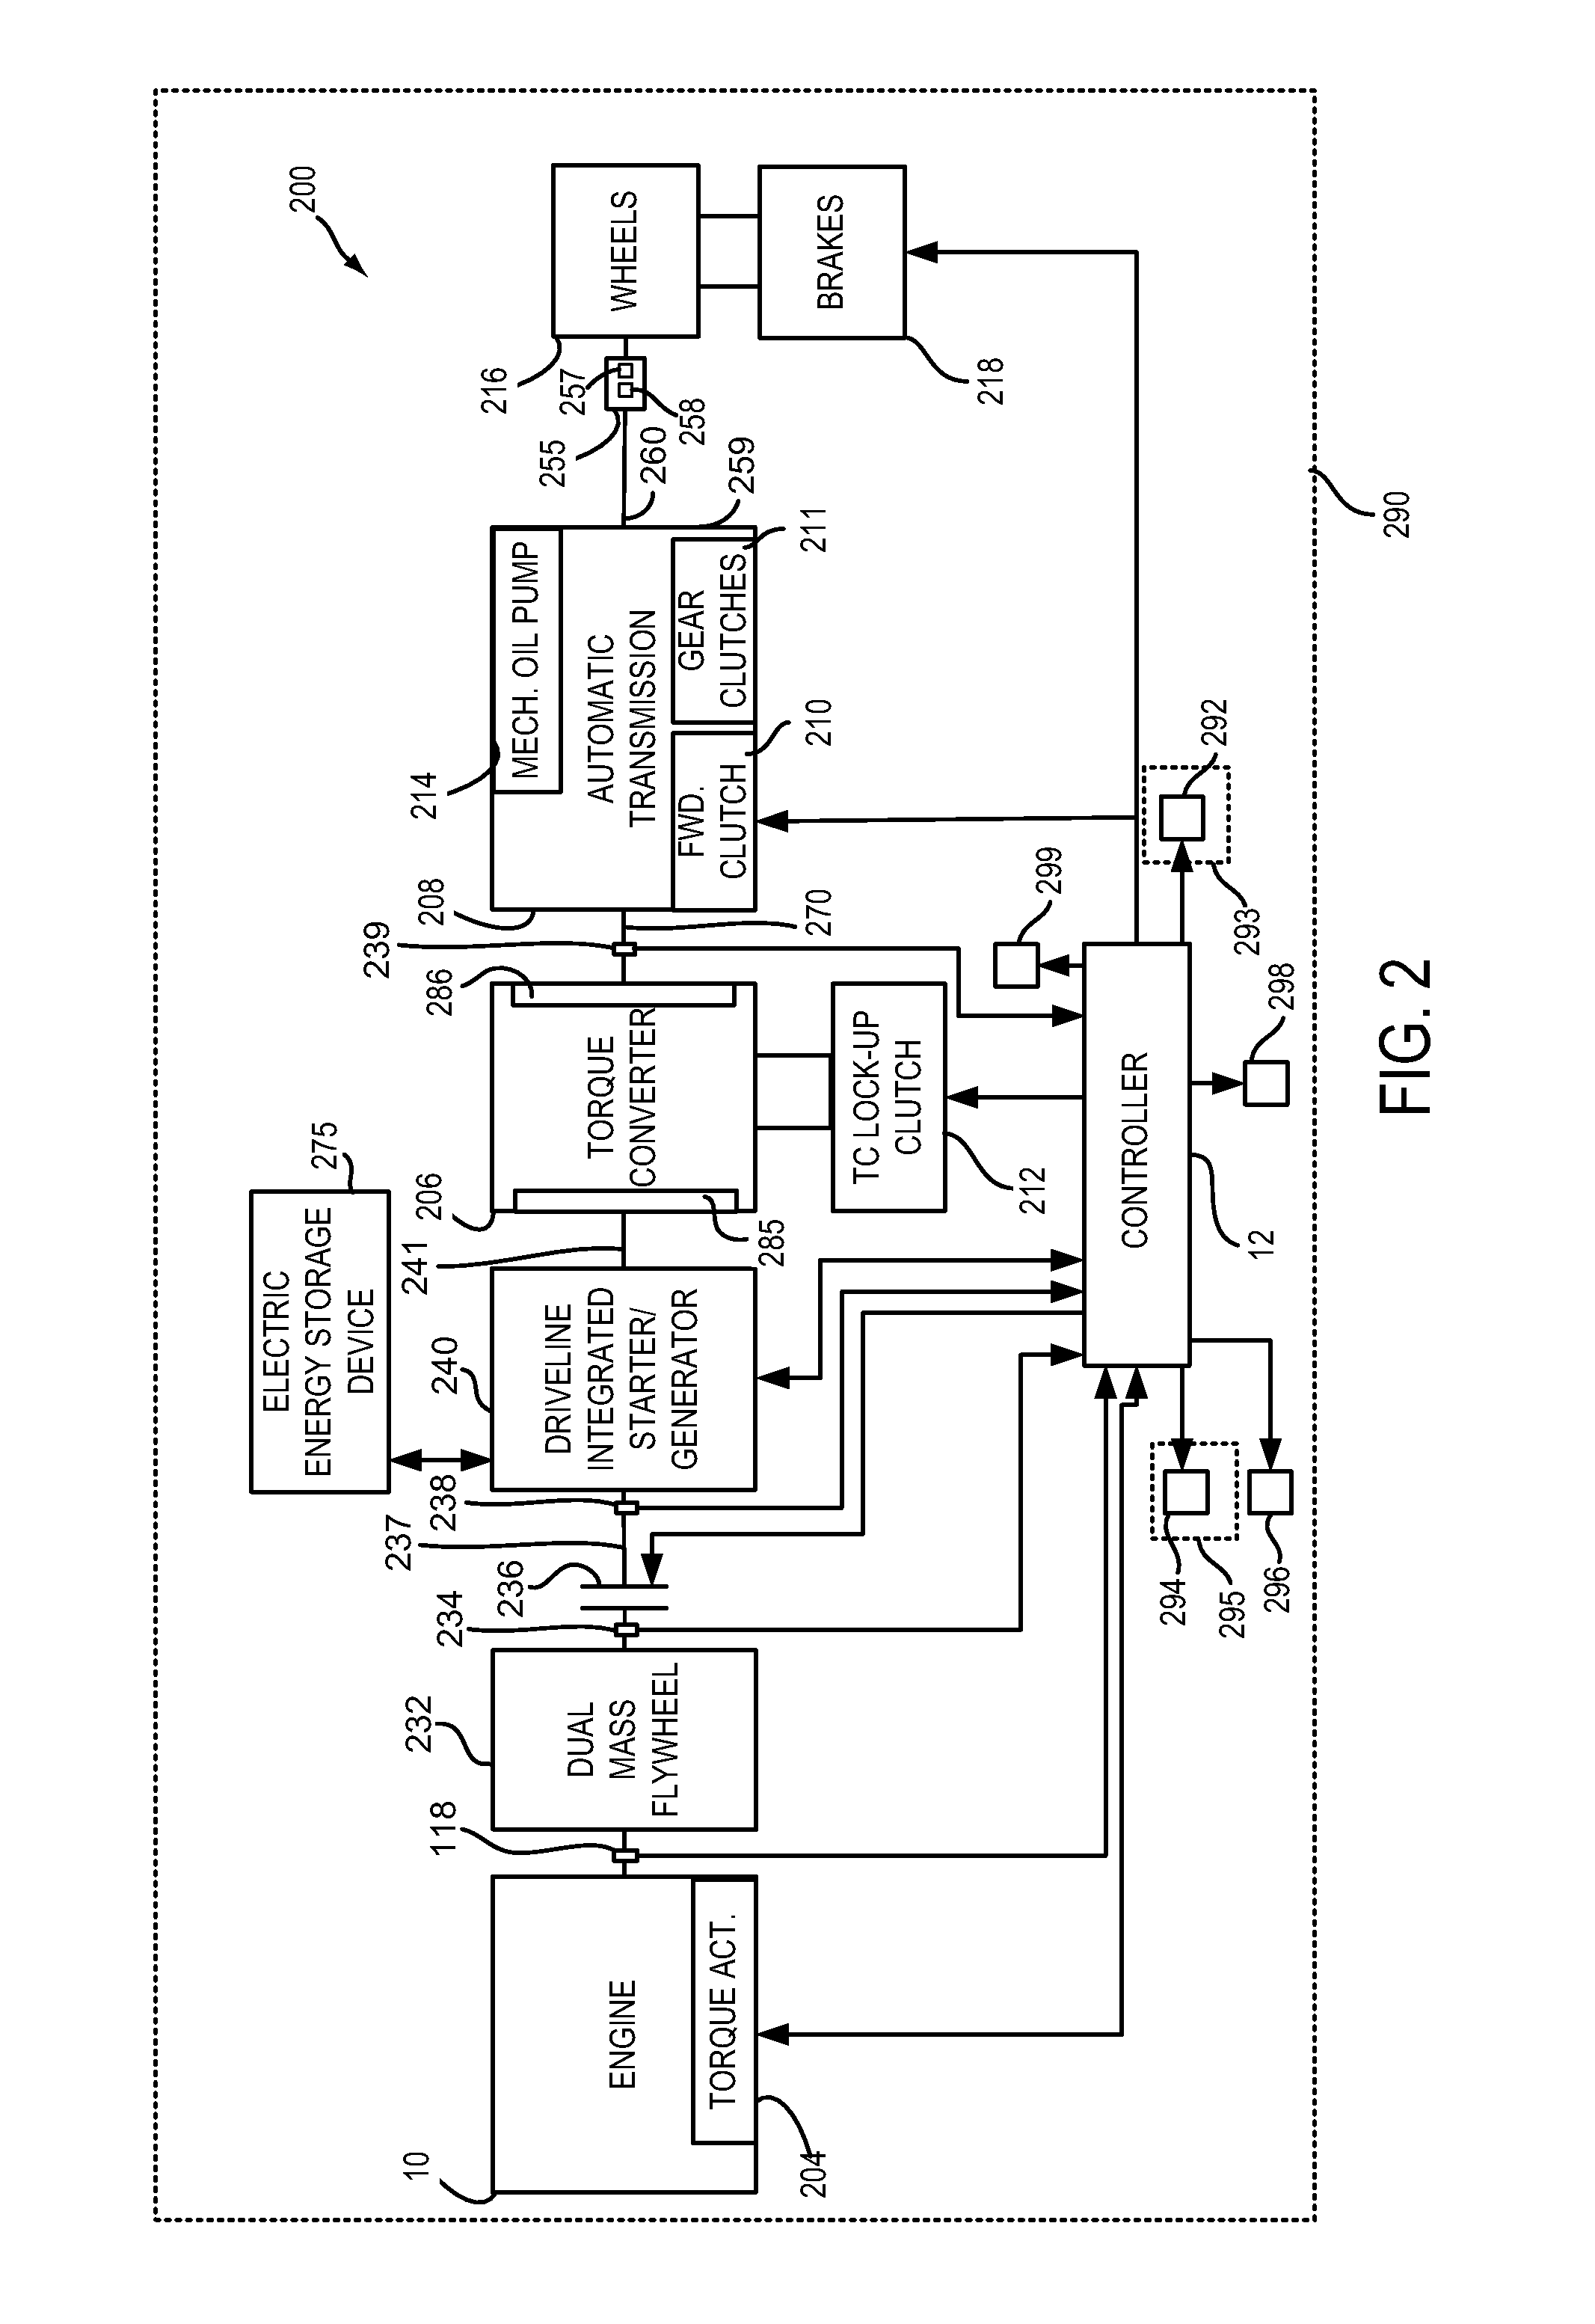 Methods and systems for operating a vehicle driveline responsive to external conditions